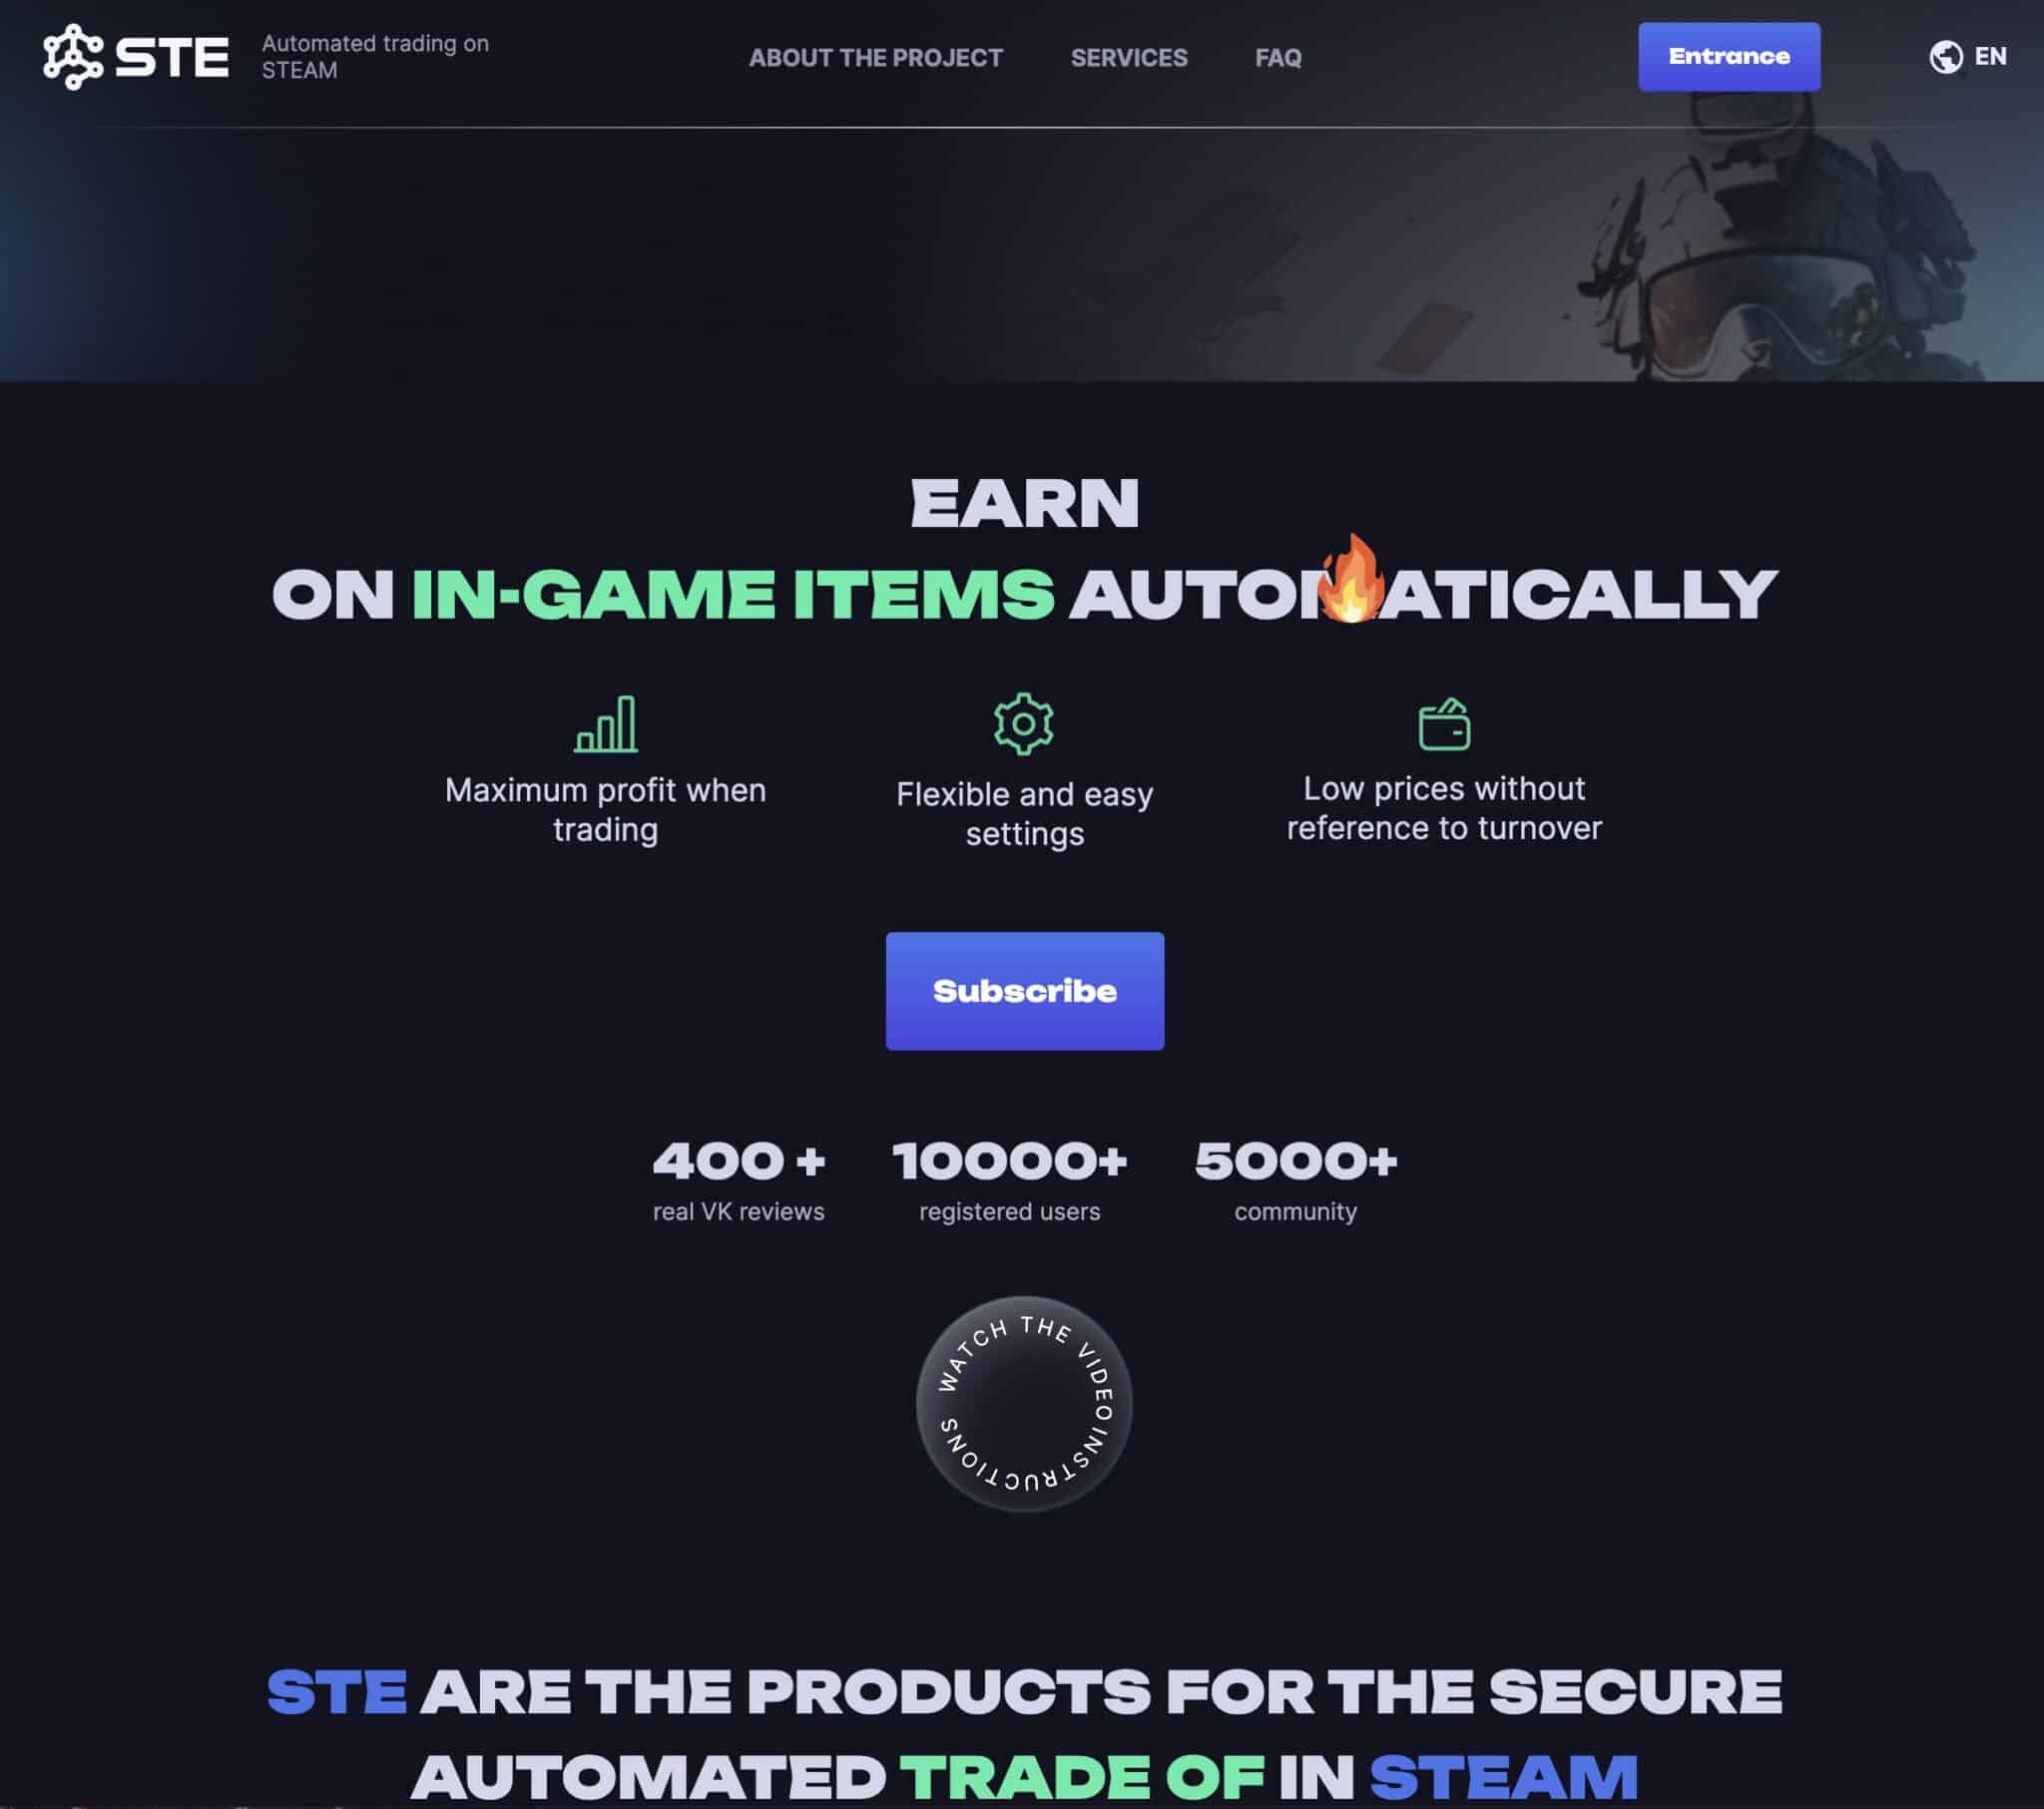 Parsing Games on the Steam Marketplace: How to Find Profitable Items